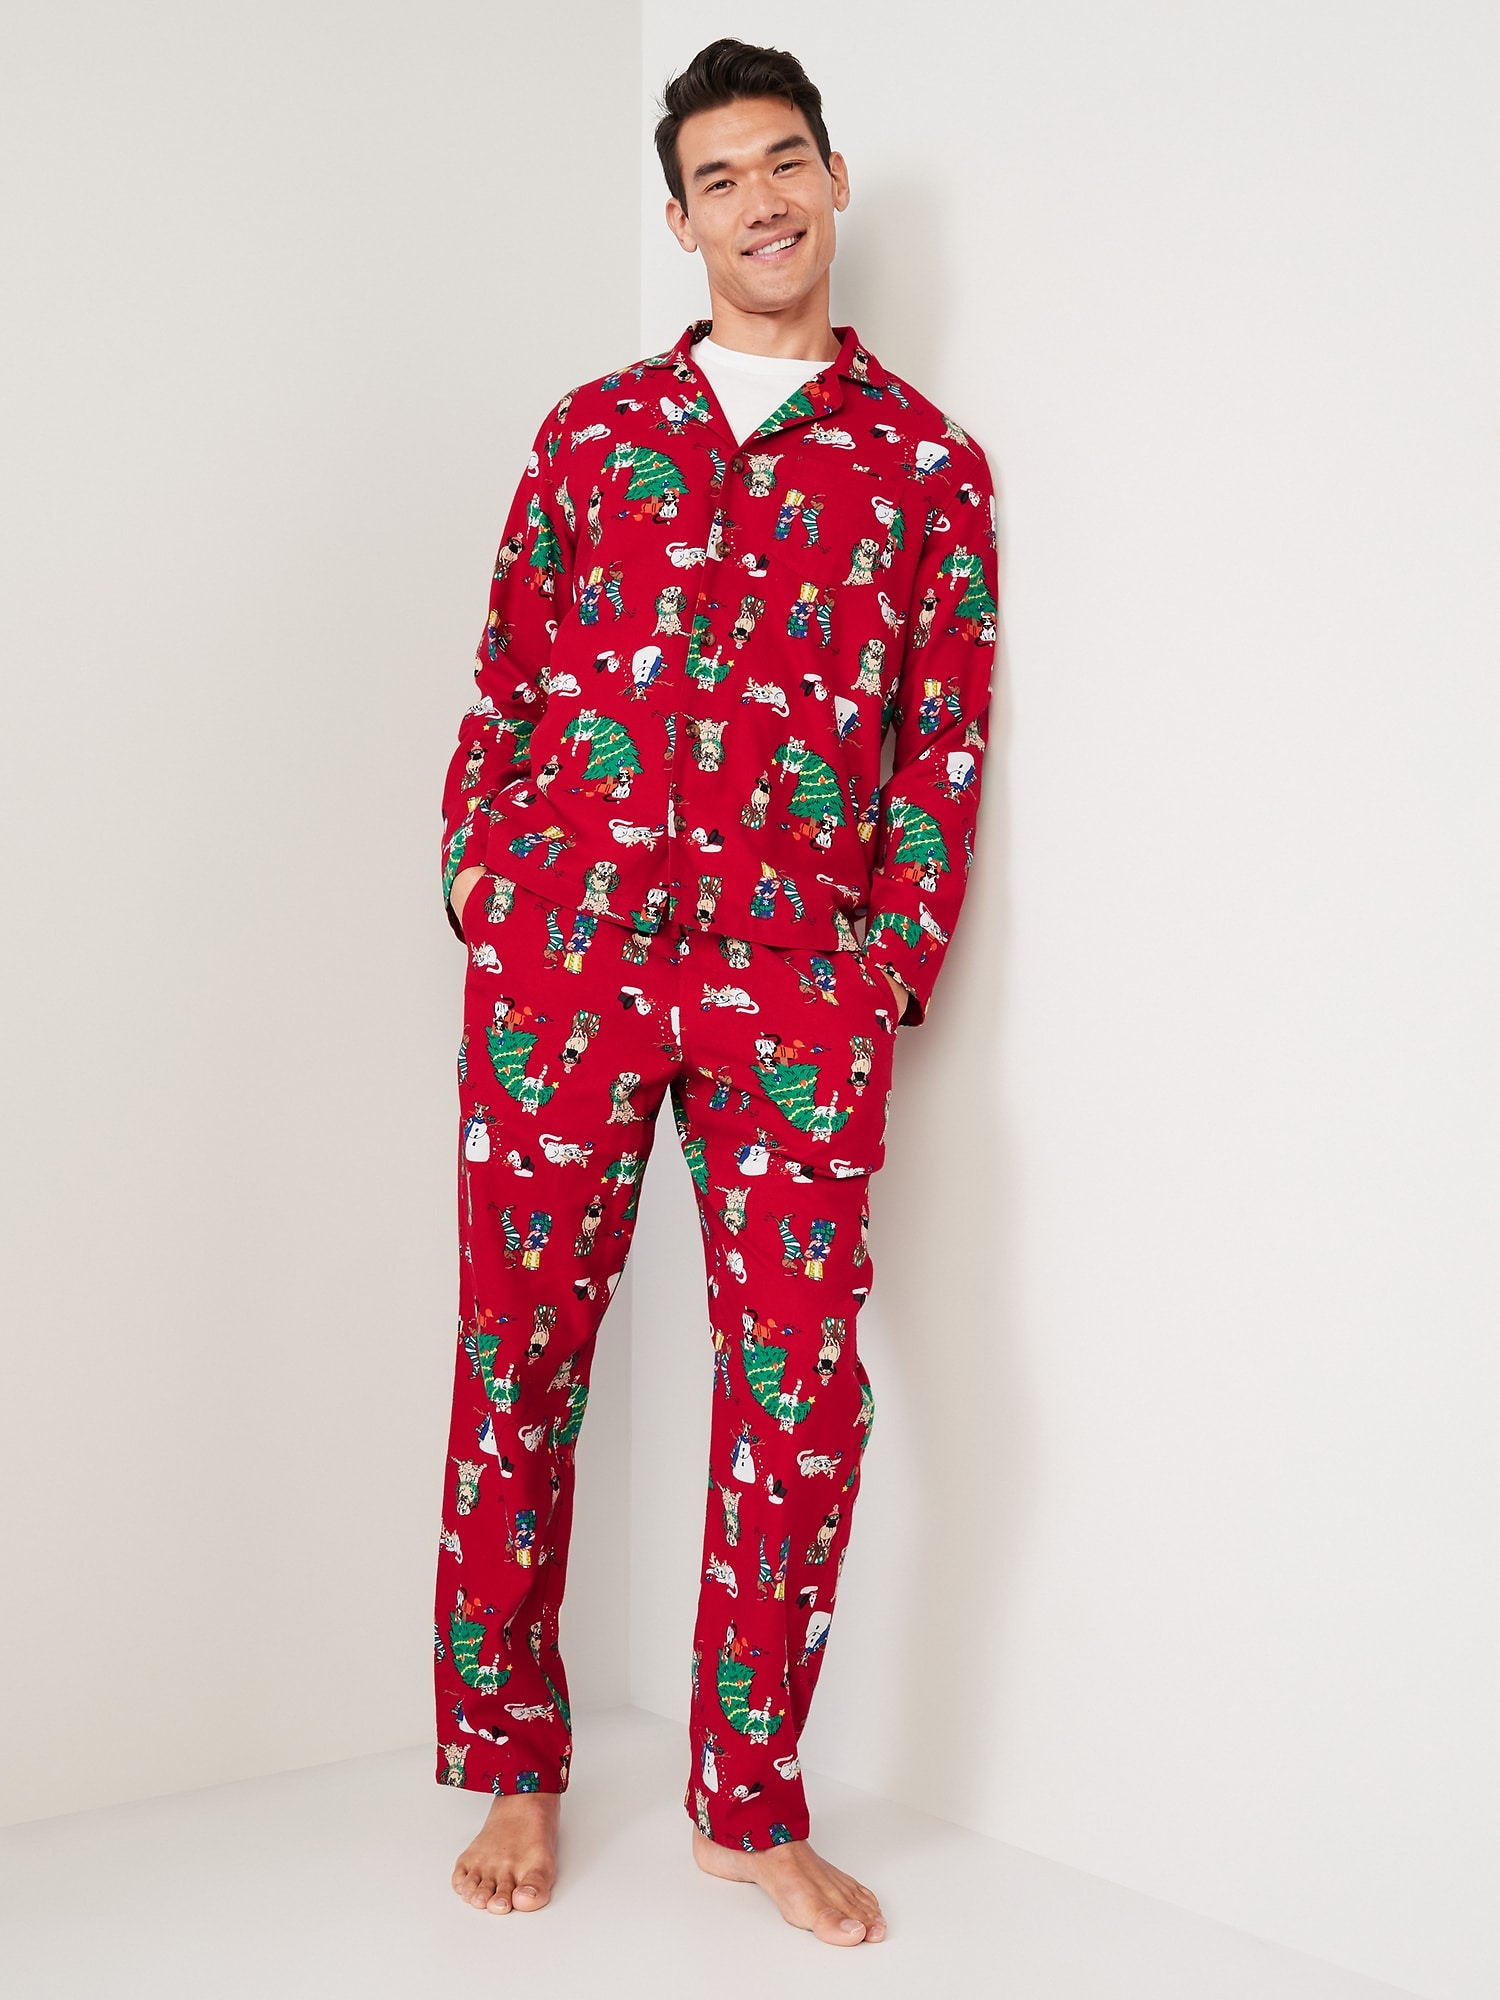 Old Navy Matching Holiday Print Flannel Pajamas Set for Men red. 1